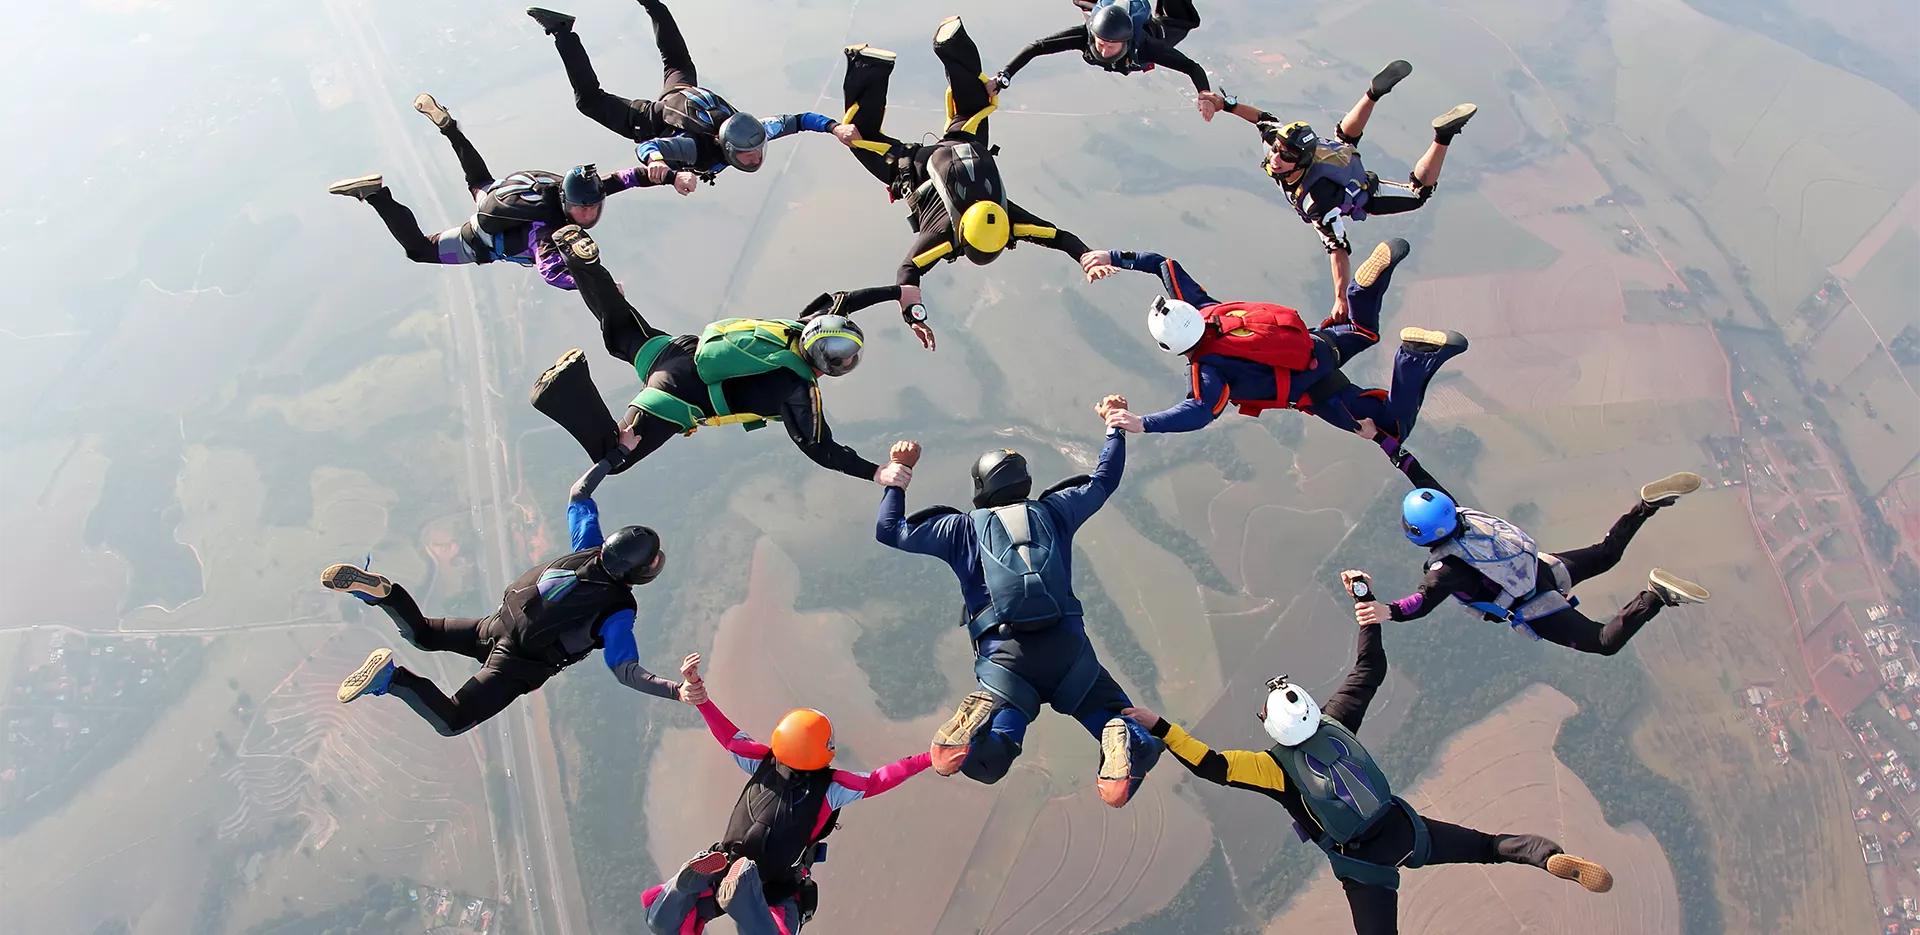 skydiving places in india